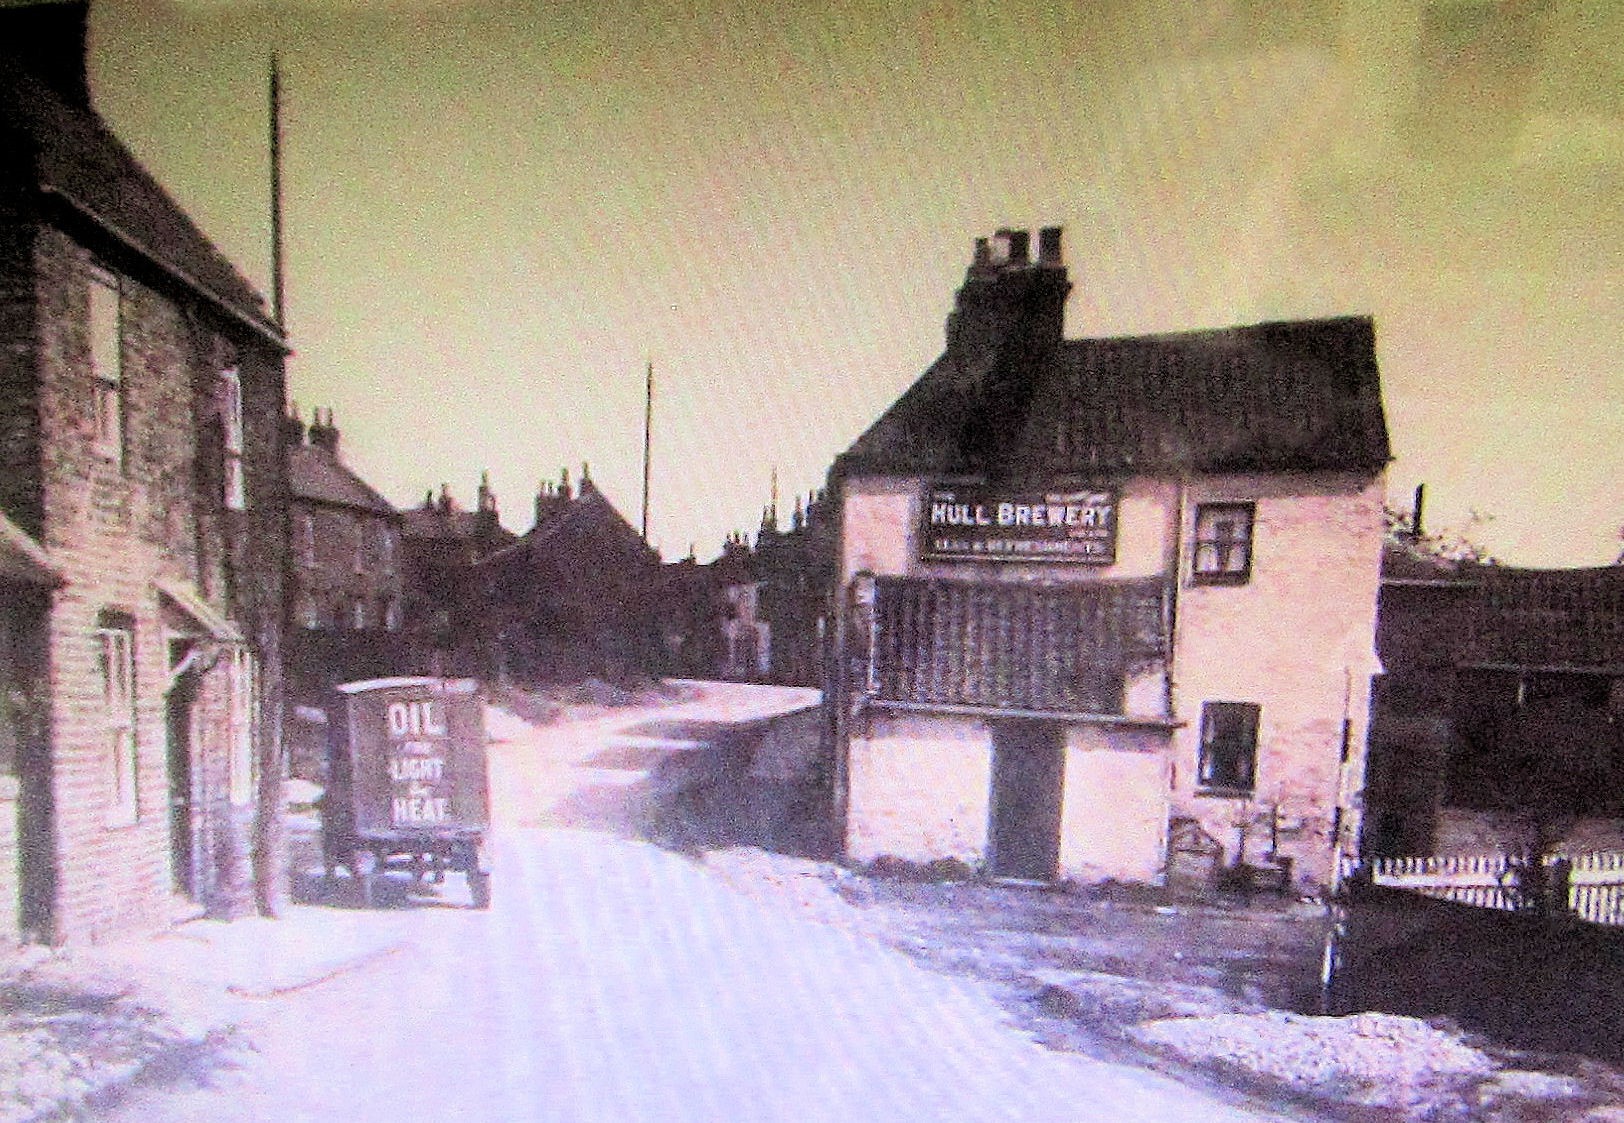 A further old photograph of the ‘Bottom Pub’ or the ‘Wheatsheaf’